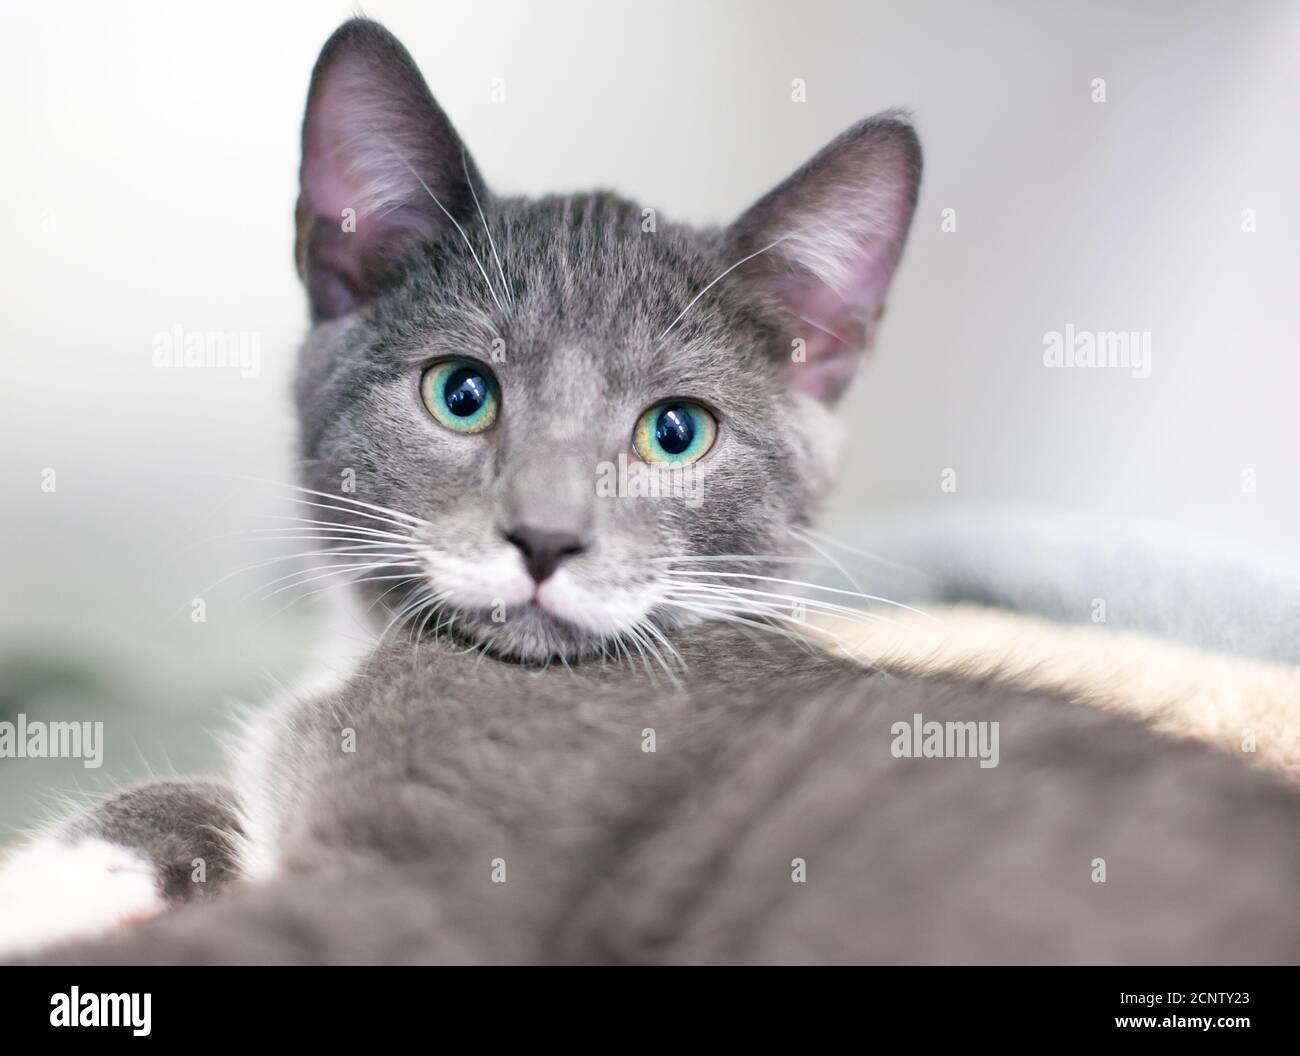 A cute gray and white shorthair kitten with bright green eyes Stock Photo